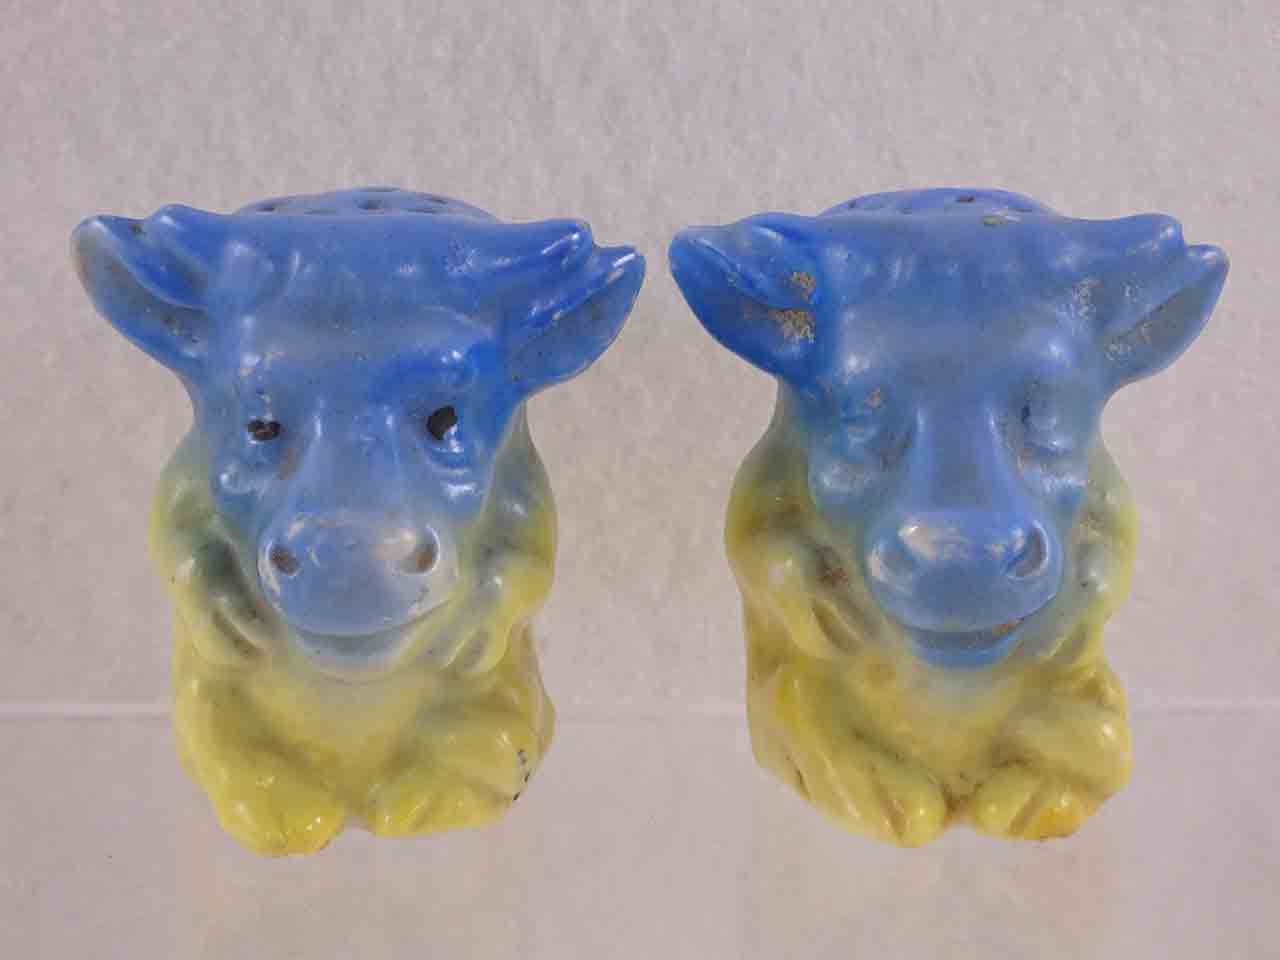 Conta & Boehme cows / bulls from Germany salt and pepper shakers